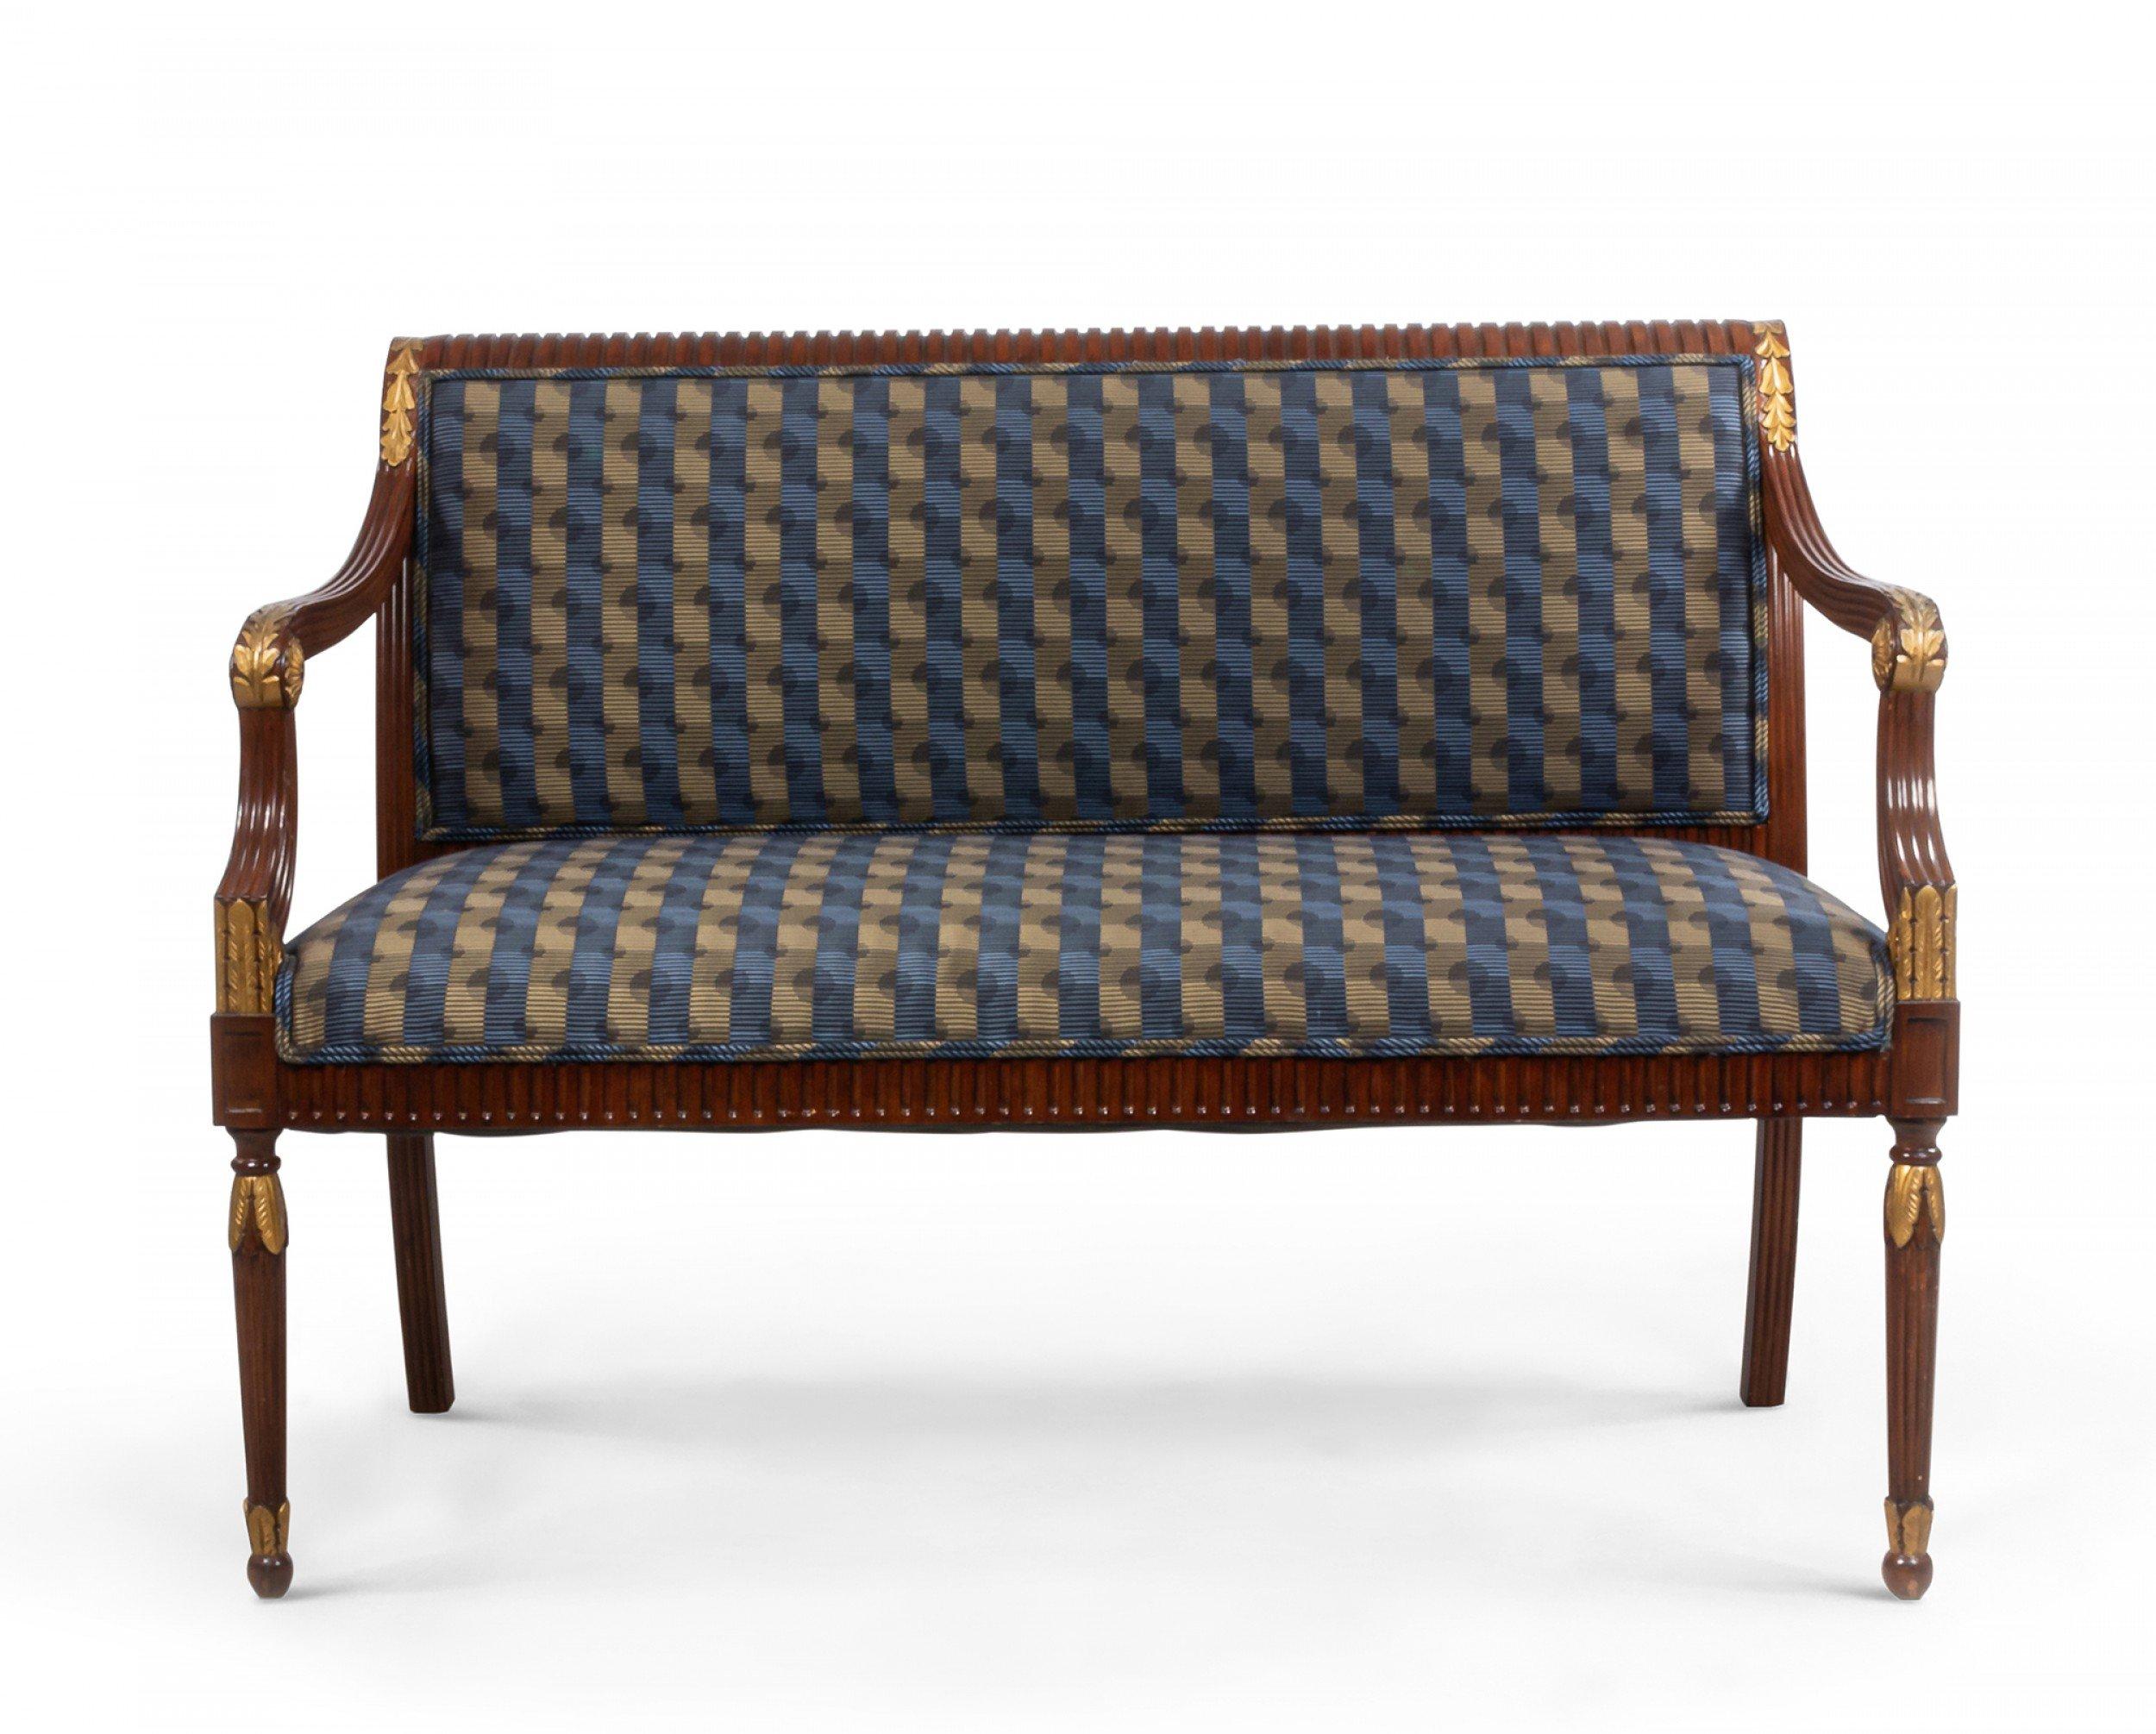 French Louis XVI style (20th Century) loveseat with blue and gray optic upholstery with a reeded mahogany frame with gold metal plaques in the shape of laurel leaves along curved arms and at legs.